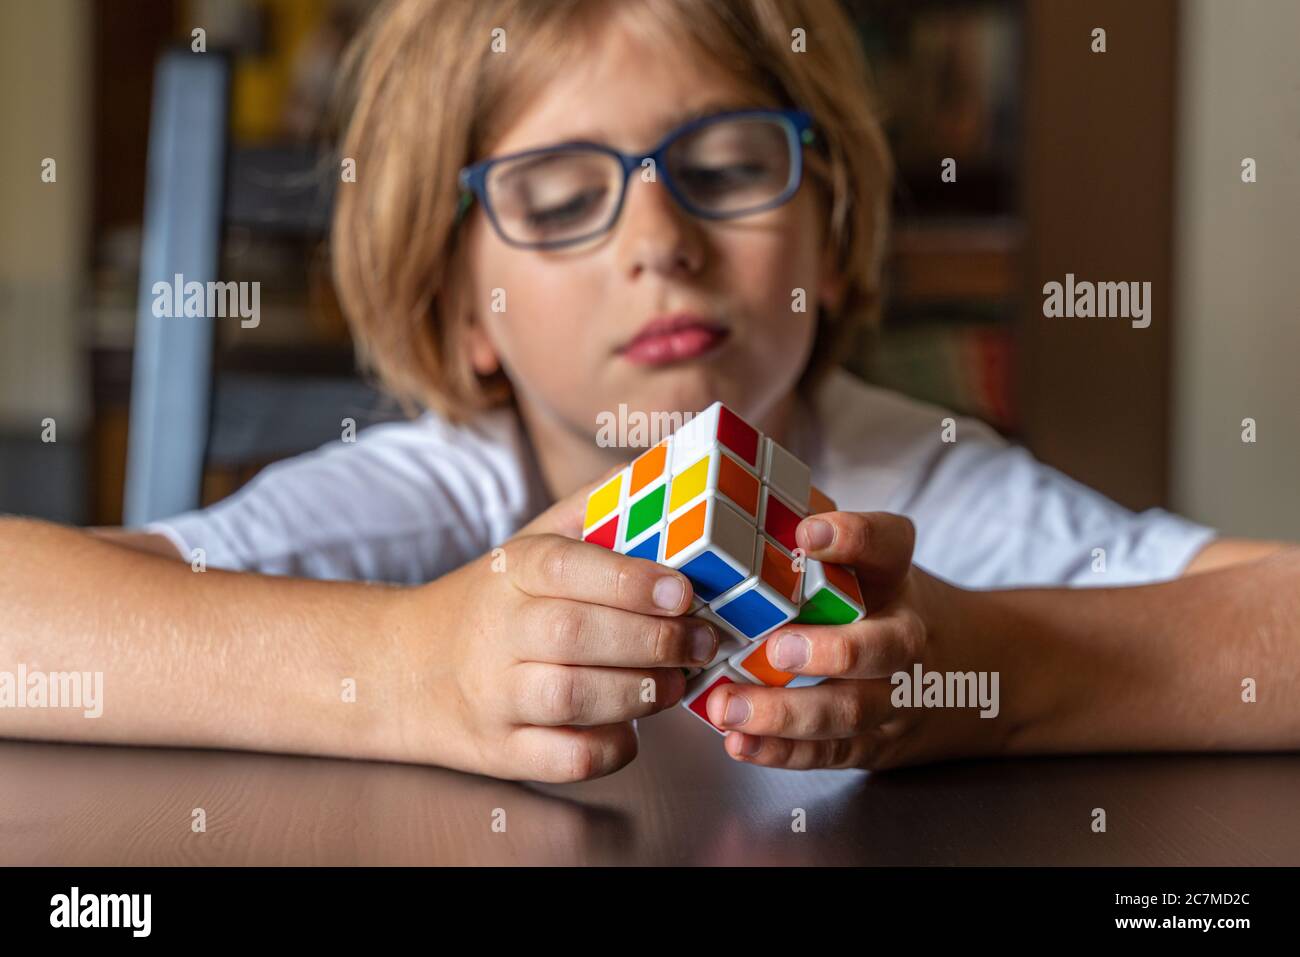 child with glasses trying to solve the Rubik's cube Stock Photo